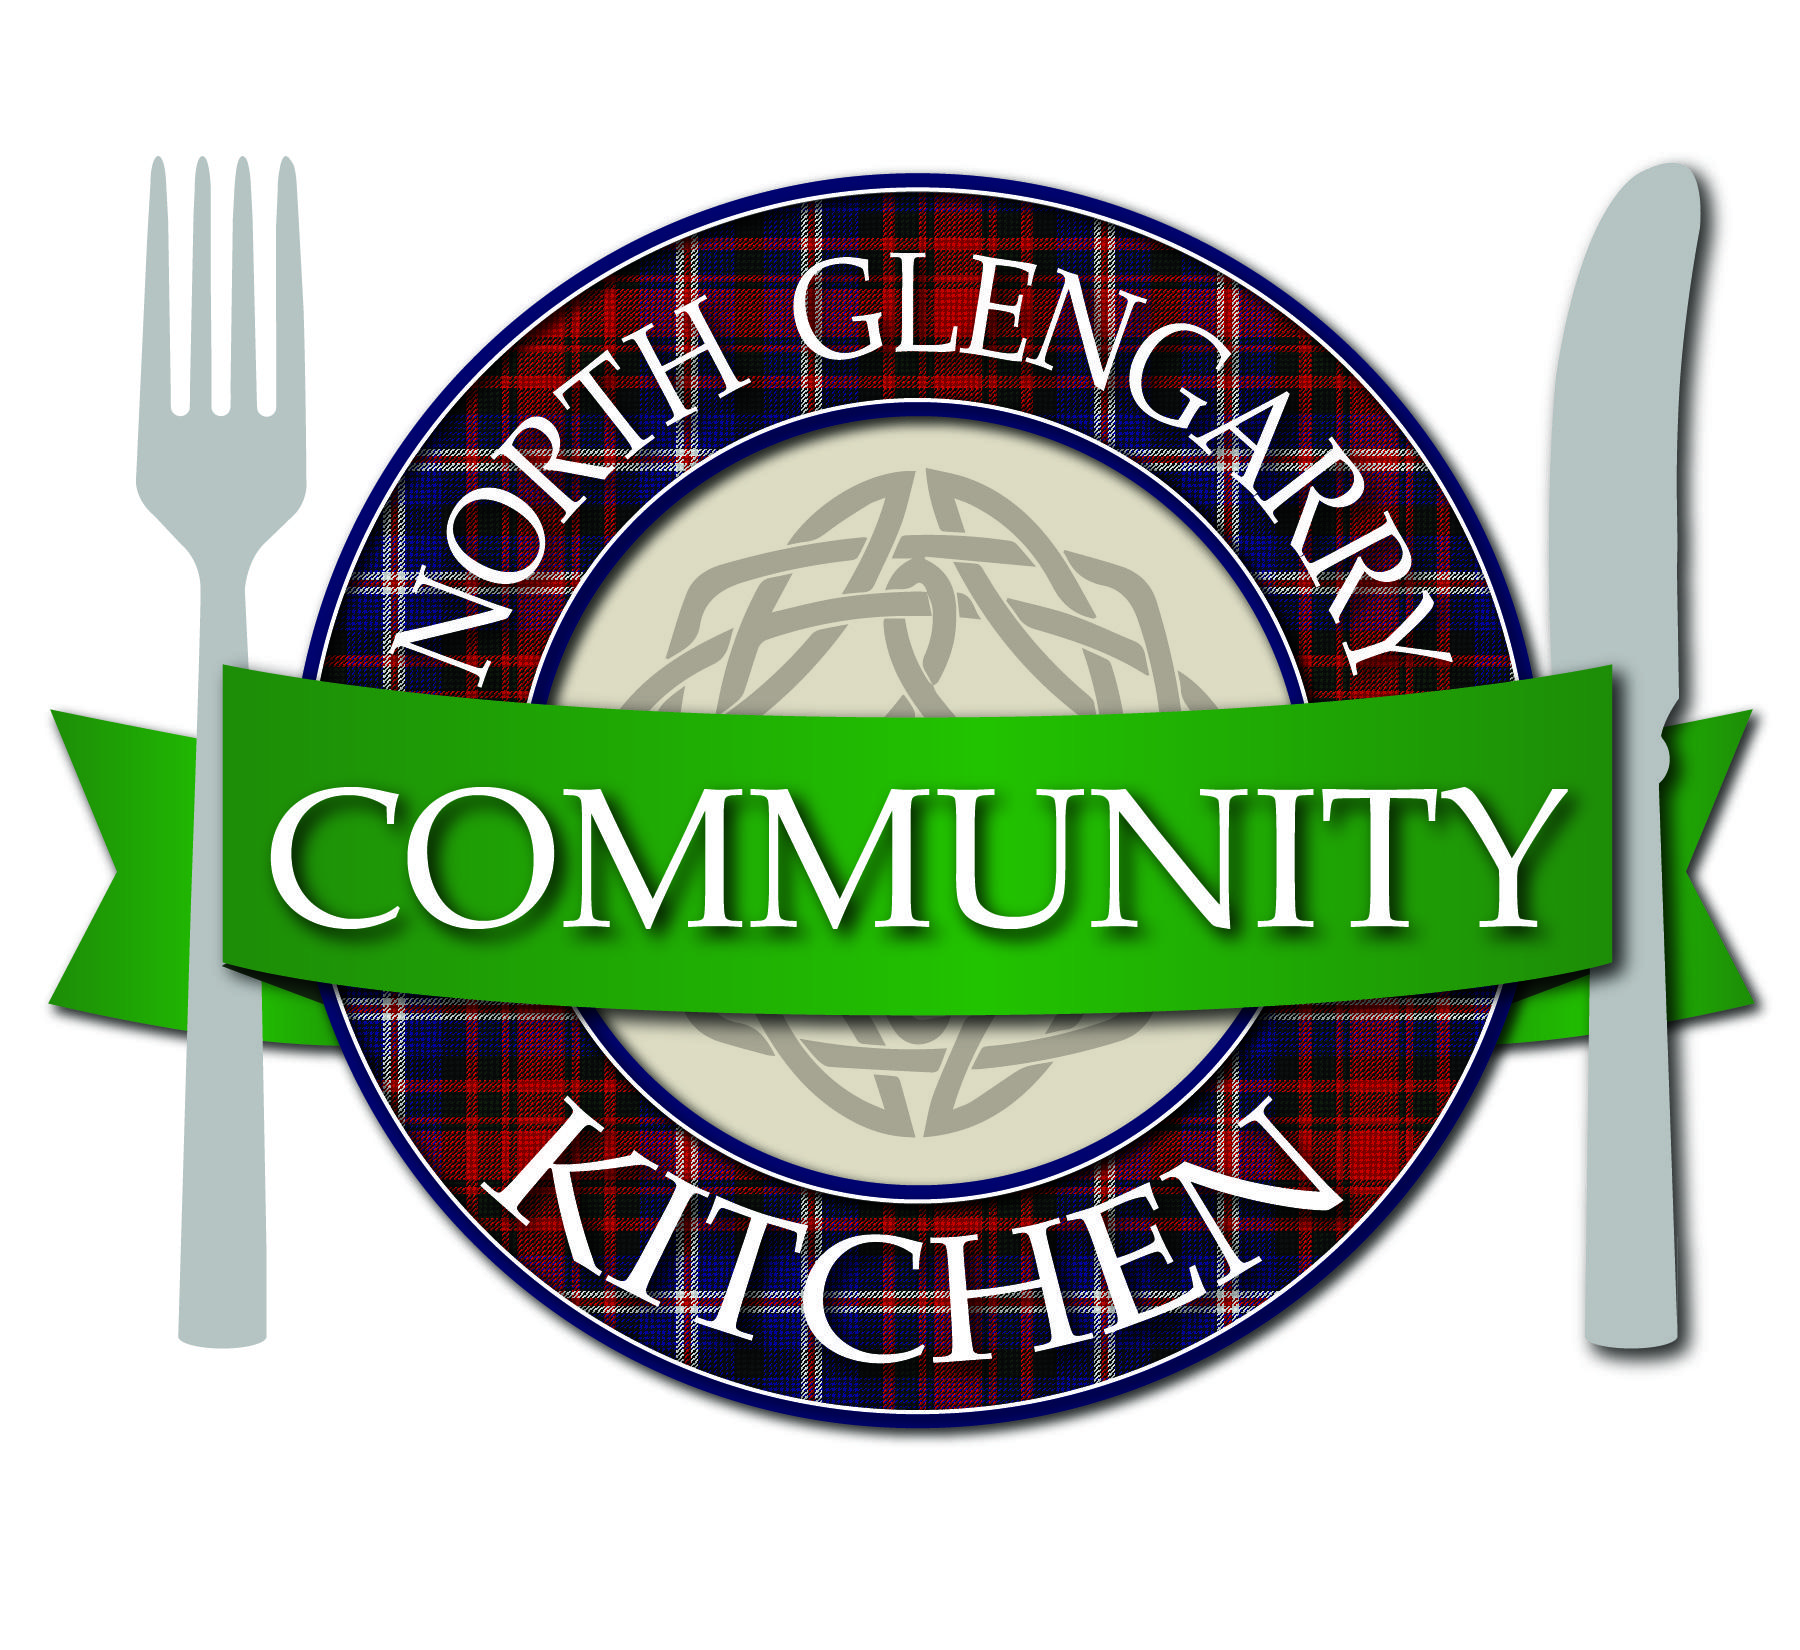 North Glengarry Community Kitchen now open for business!